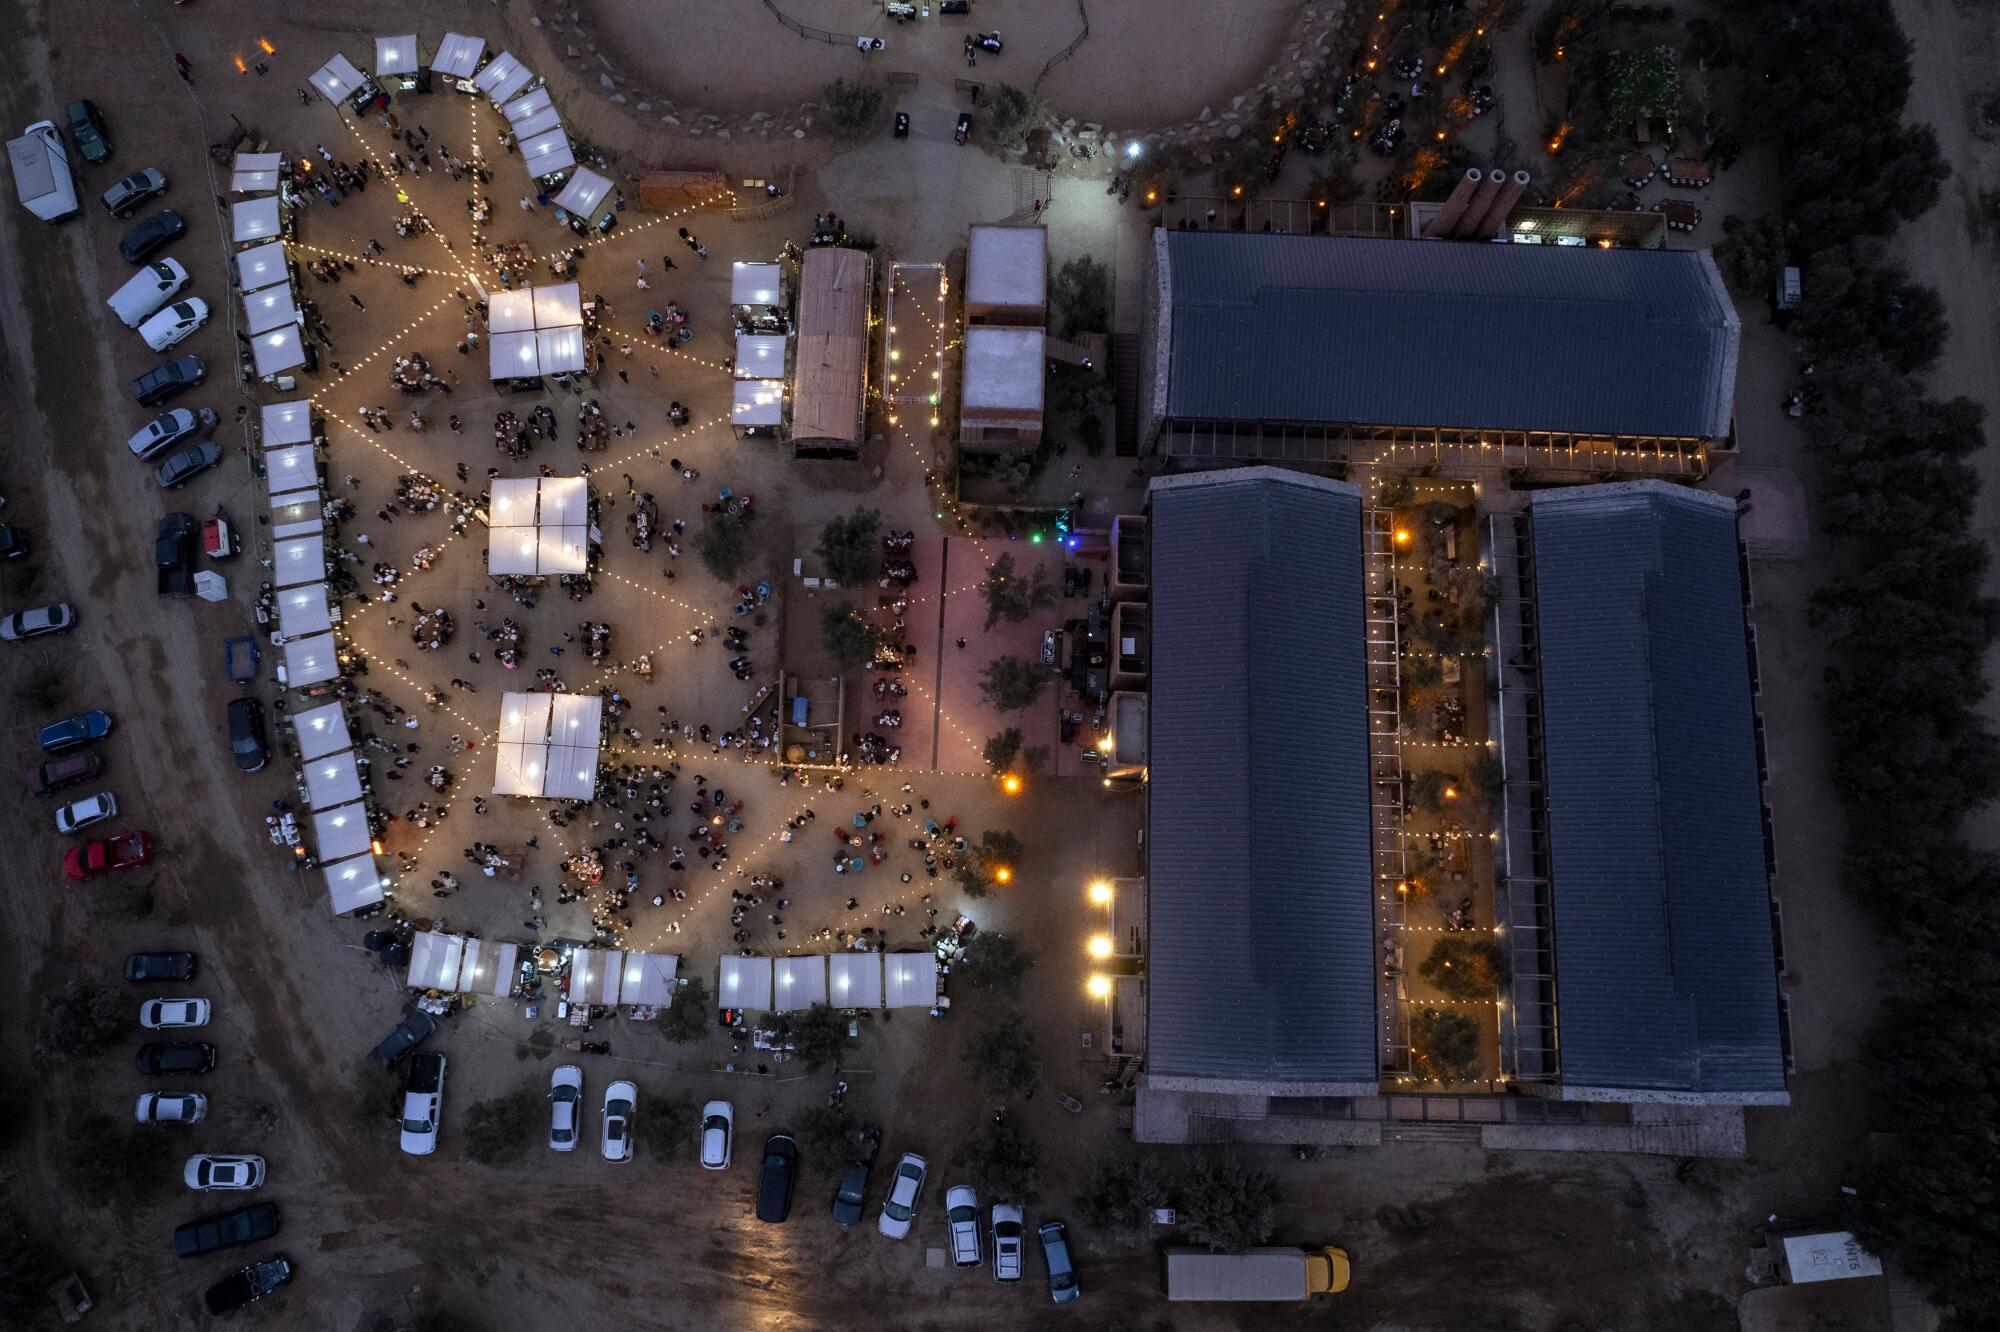 Aerial view of the Valle Food & Wine Festival at the Bruma winery, with rows of booths and large warehouses